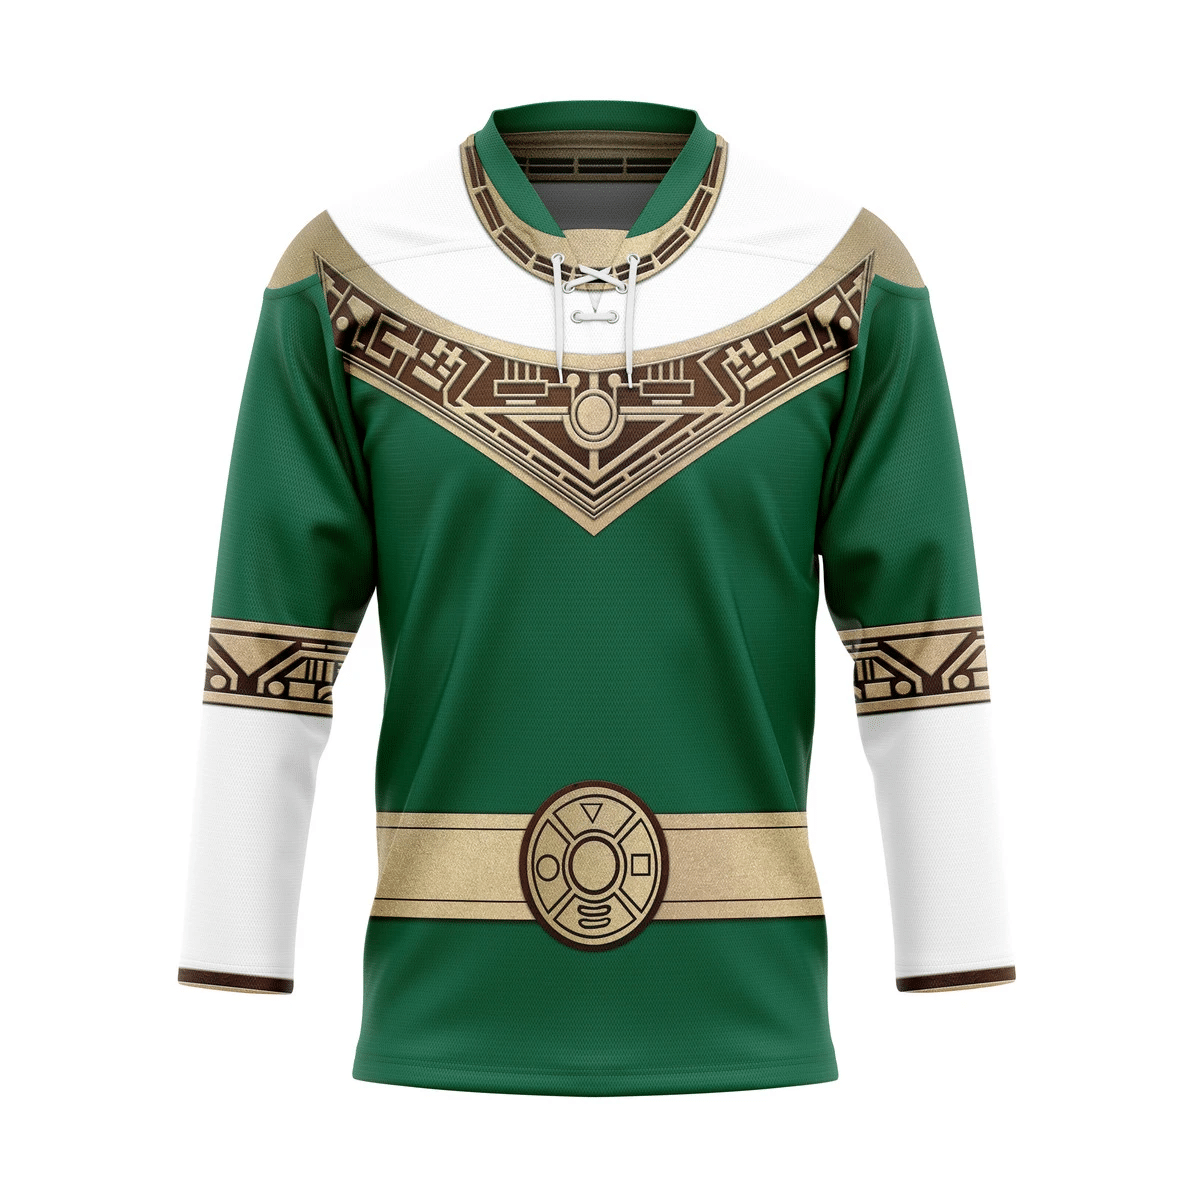 Check out our collection of unique and stylish hockey jerseys from all over the world 159